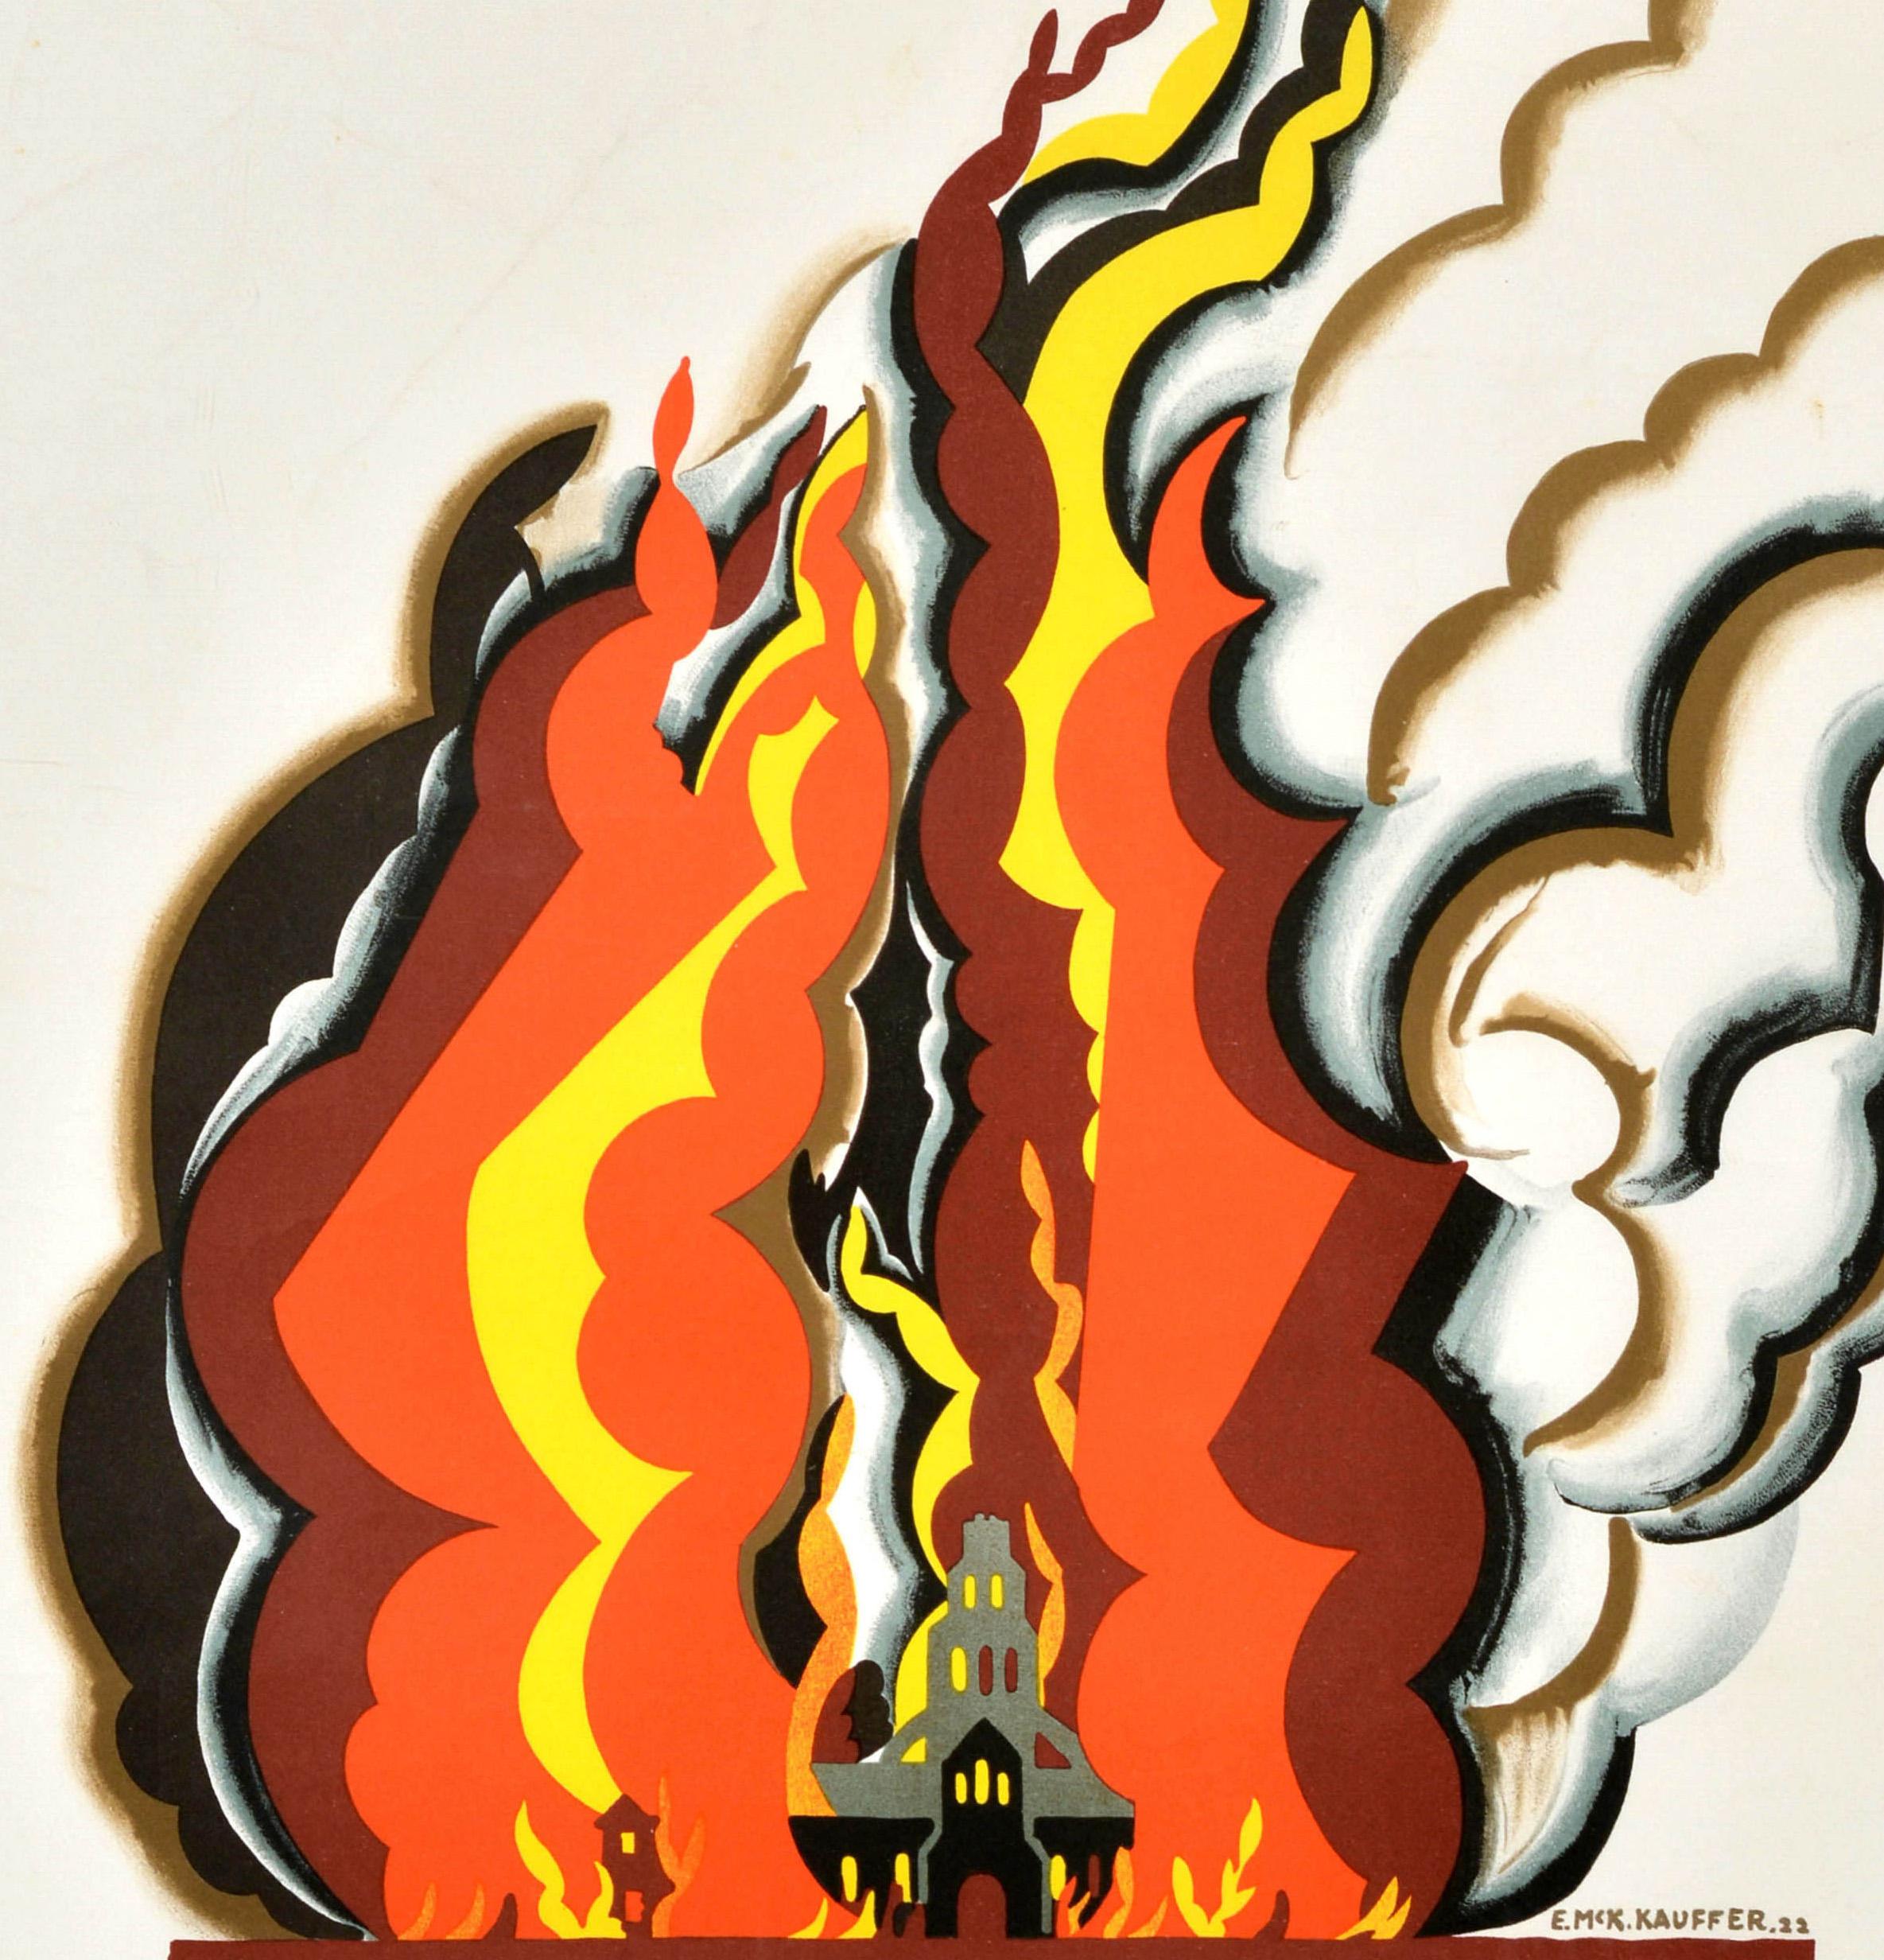 Vintage Official Reproduction Poster Great Fire Of London Transport Kauffer - Print by Edward McKnight Kauffer